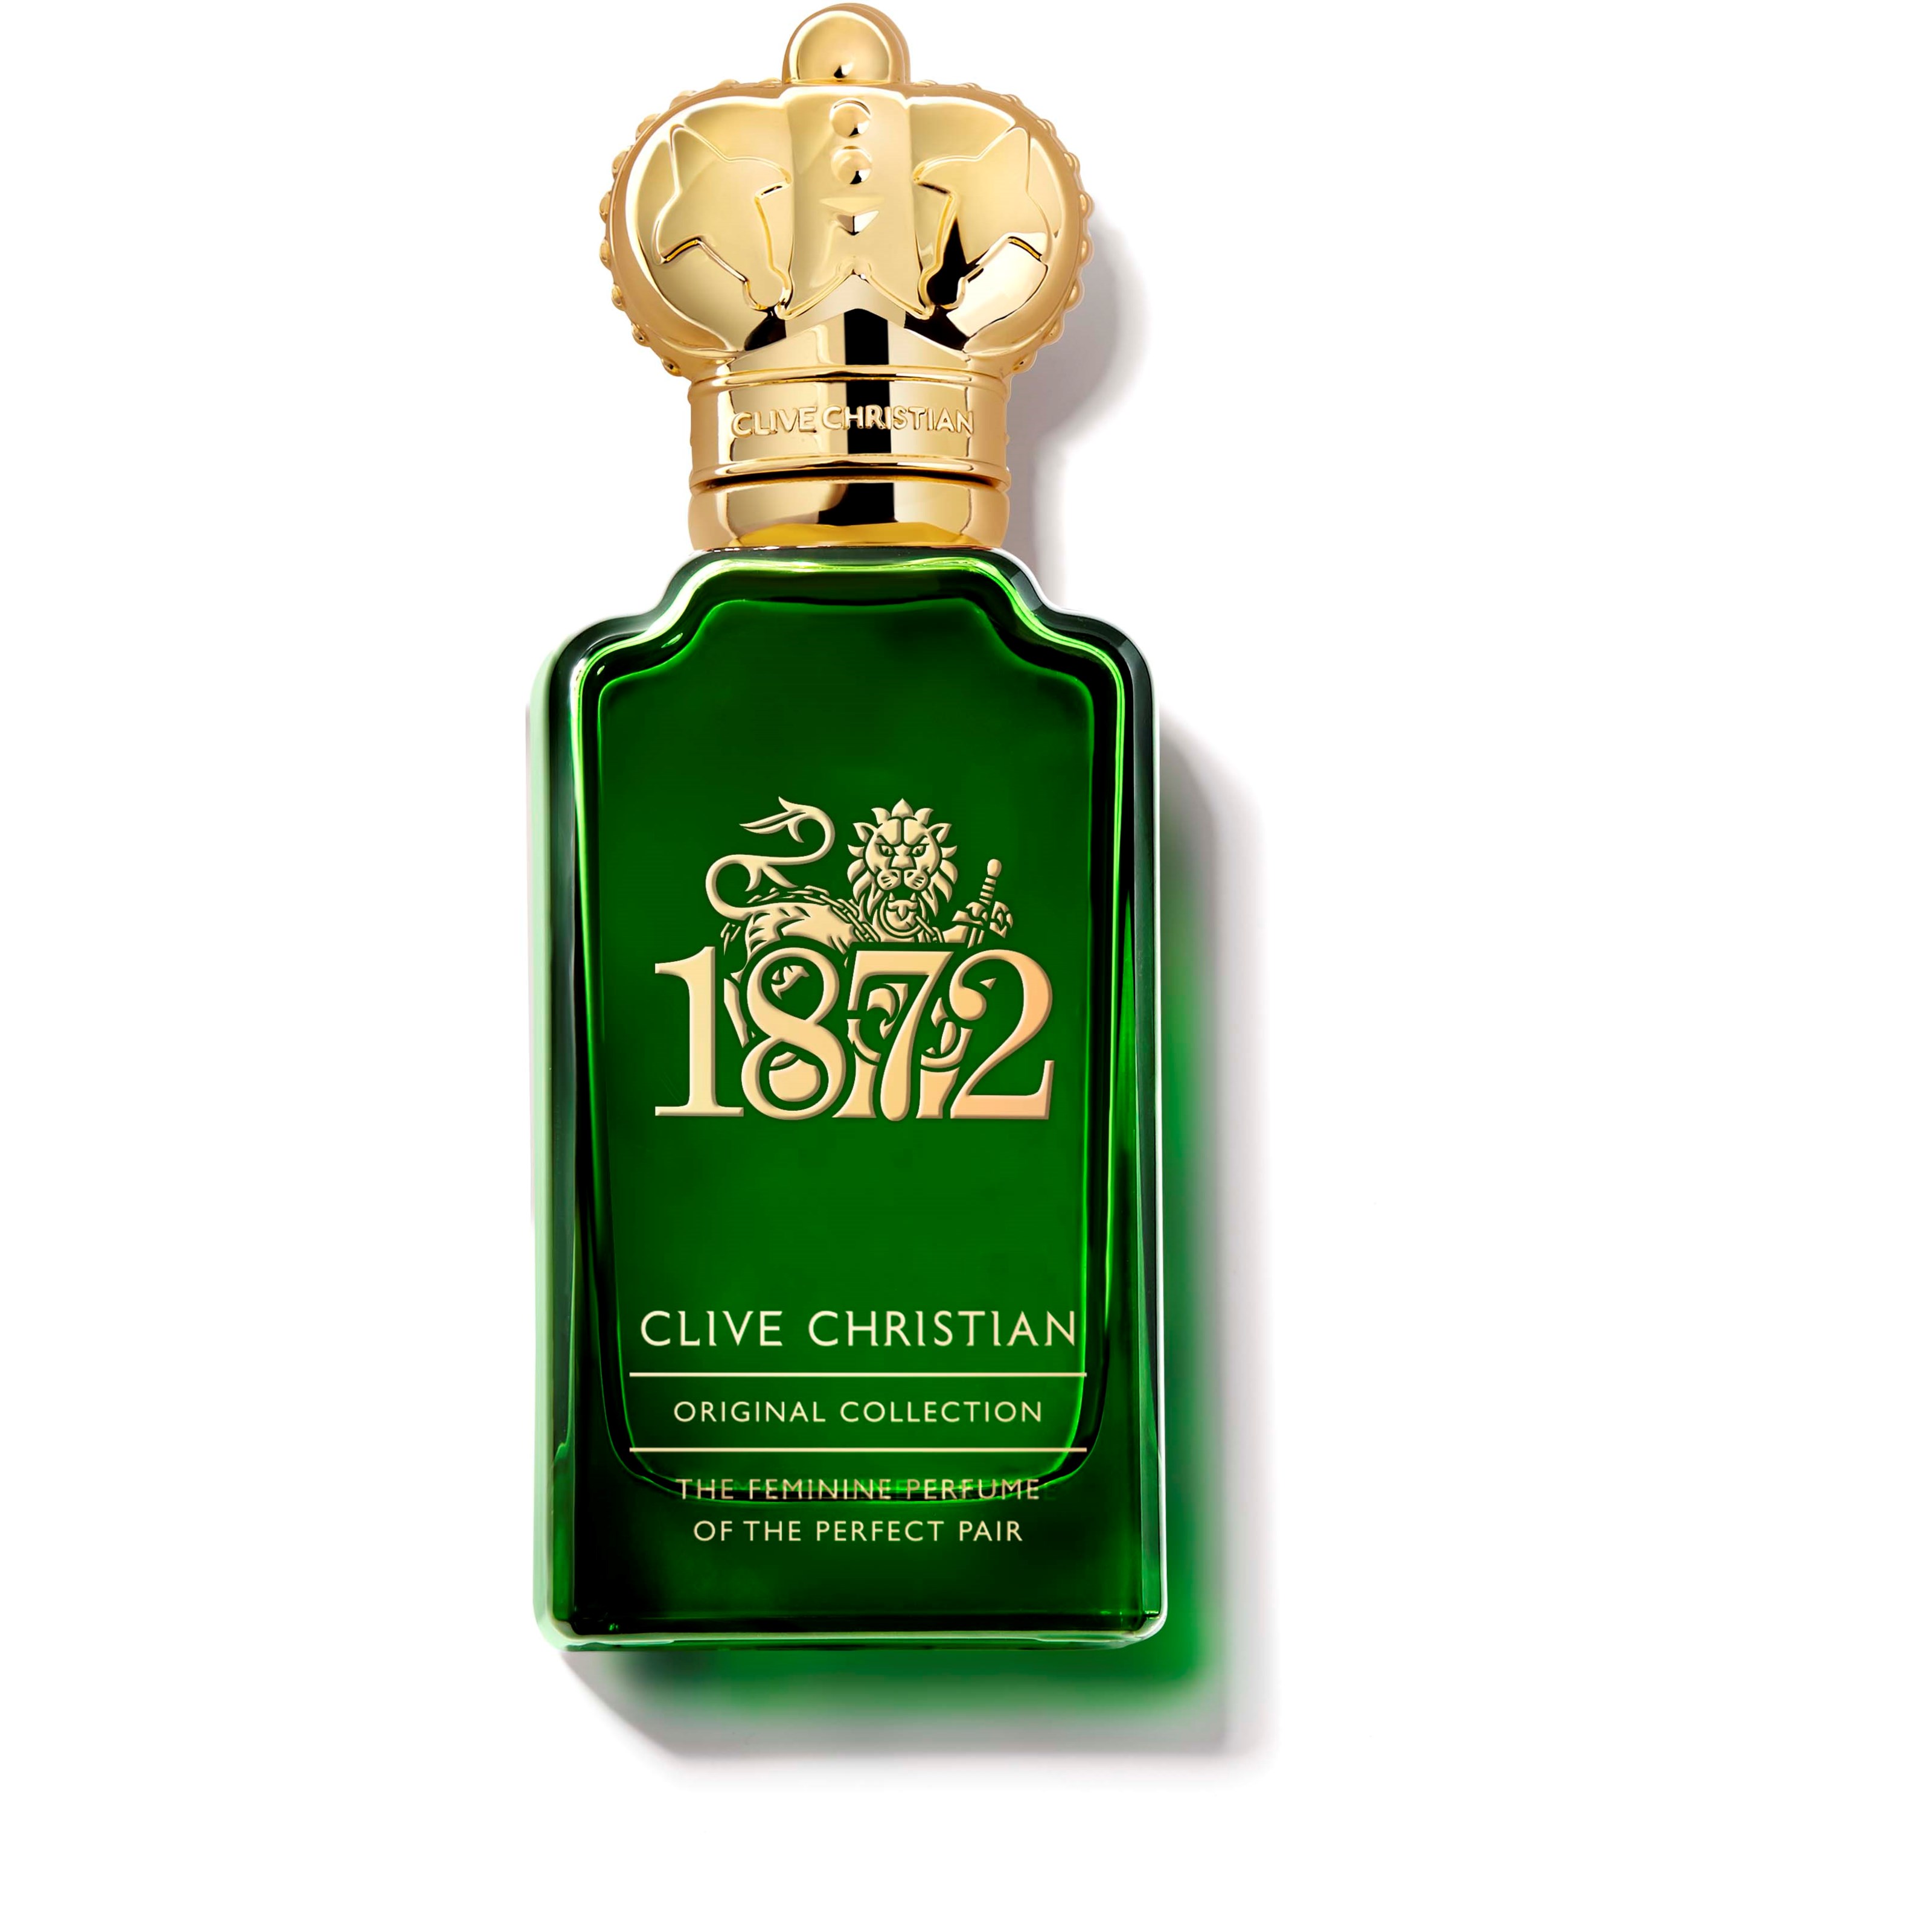 Clive Christian Original Collection 1872 The Feminine Perfume Of